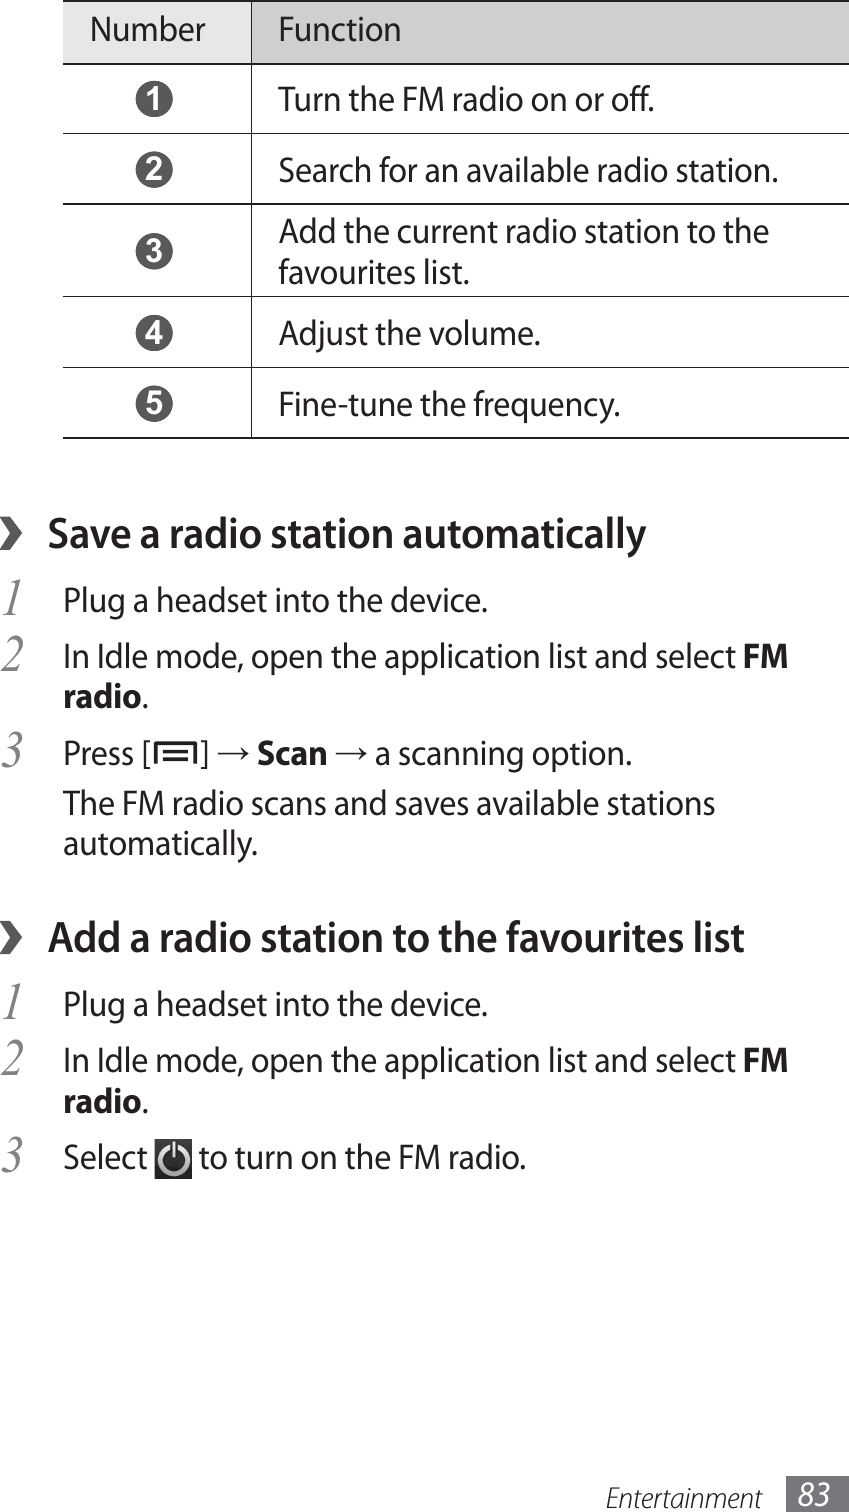 Entertainment 83Number Function 1 Turn the FM radio on or off.  2 Search for an available radio station. 3 Add the current radio station to the favourites list. 4 Adjust the volume.  5 Fine-tune the frequency.Save a radio station automatically ›Plug a headset into the device.1 In Idle mode, open the application list and select 2 FM radio.Press [3 ] → Scan → a scanning option. The FM radio scans and saves available stations automatically.Add a radio station to the favourites list ›Plug a headset into the device.1 In Idle mode, open the application list and select 2 FM radio.Select 3  to turn on the FM radio.